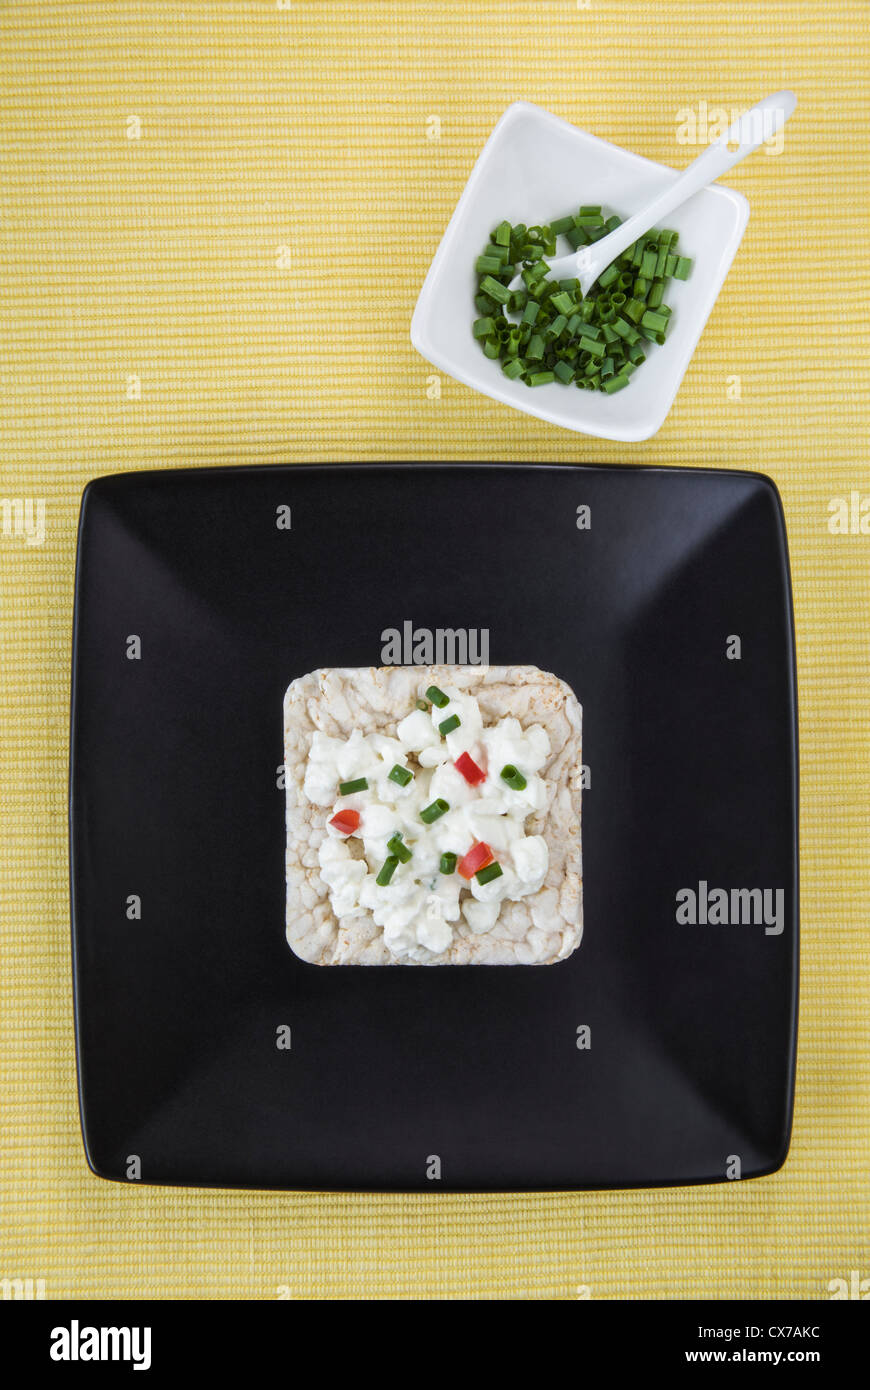 Rice Cake topped with Cottage Cheese on black Plate Stock Photo